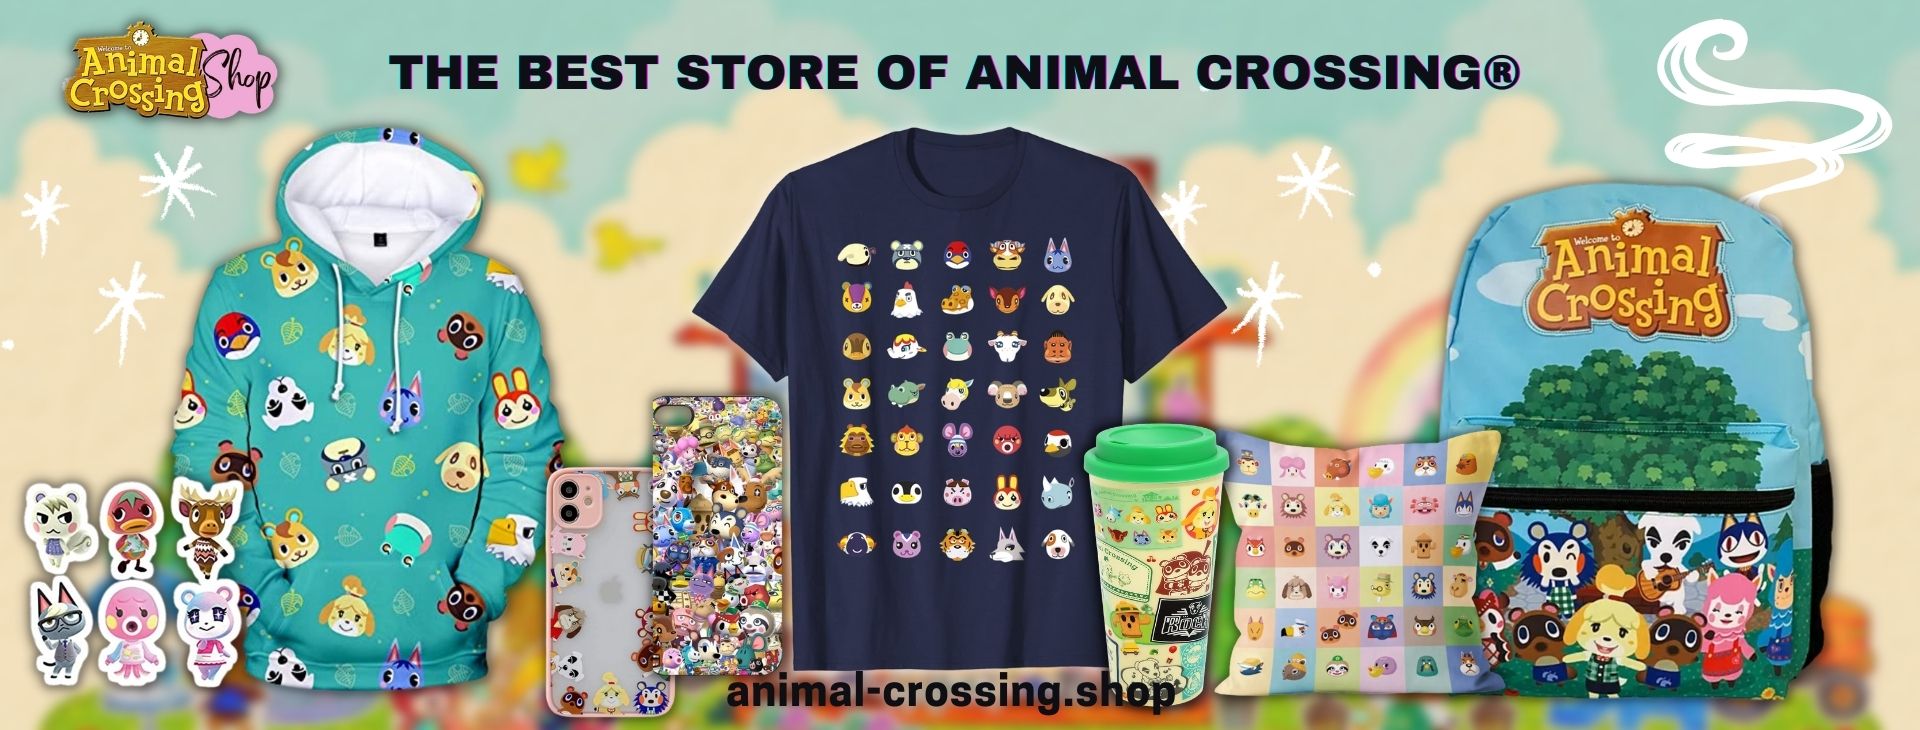 Animal Crossing Shop - Official Animal Crossing Merchandise Store